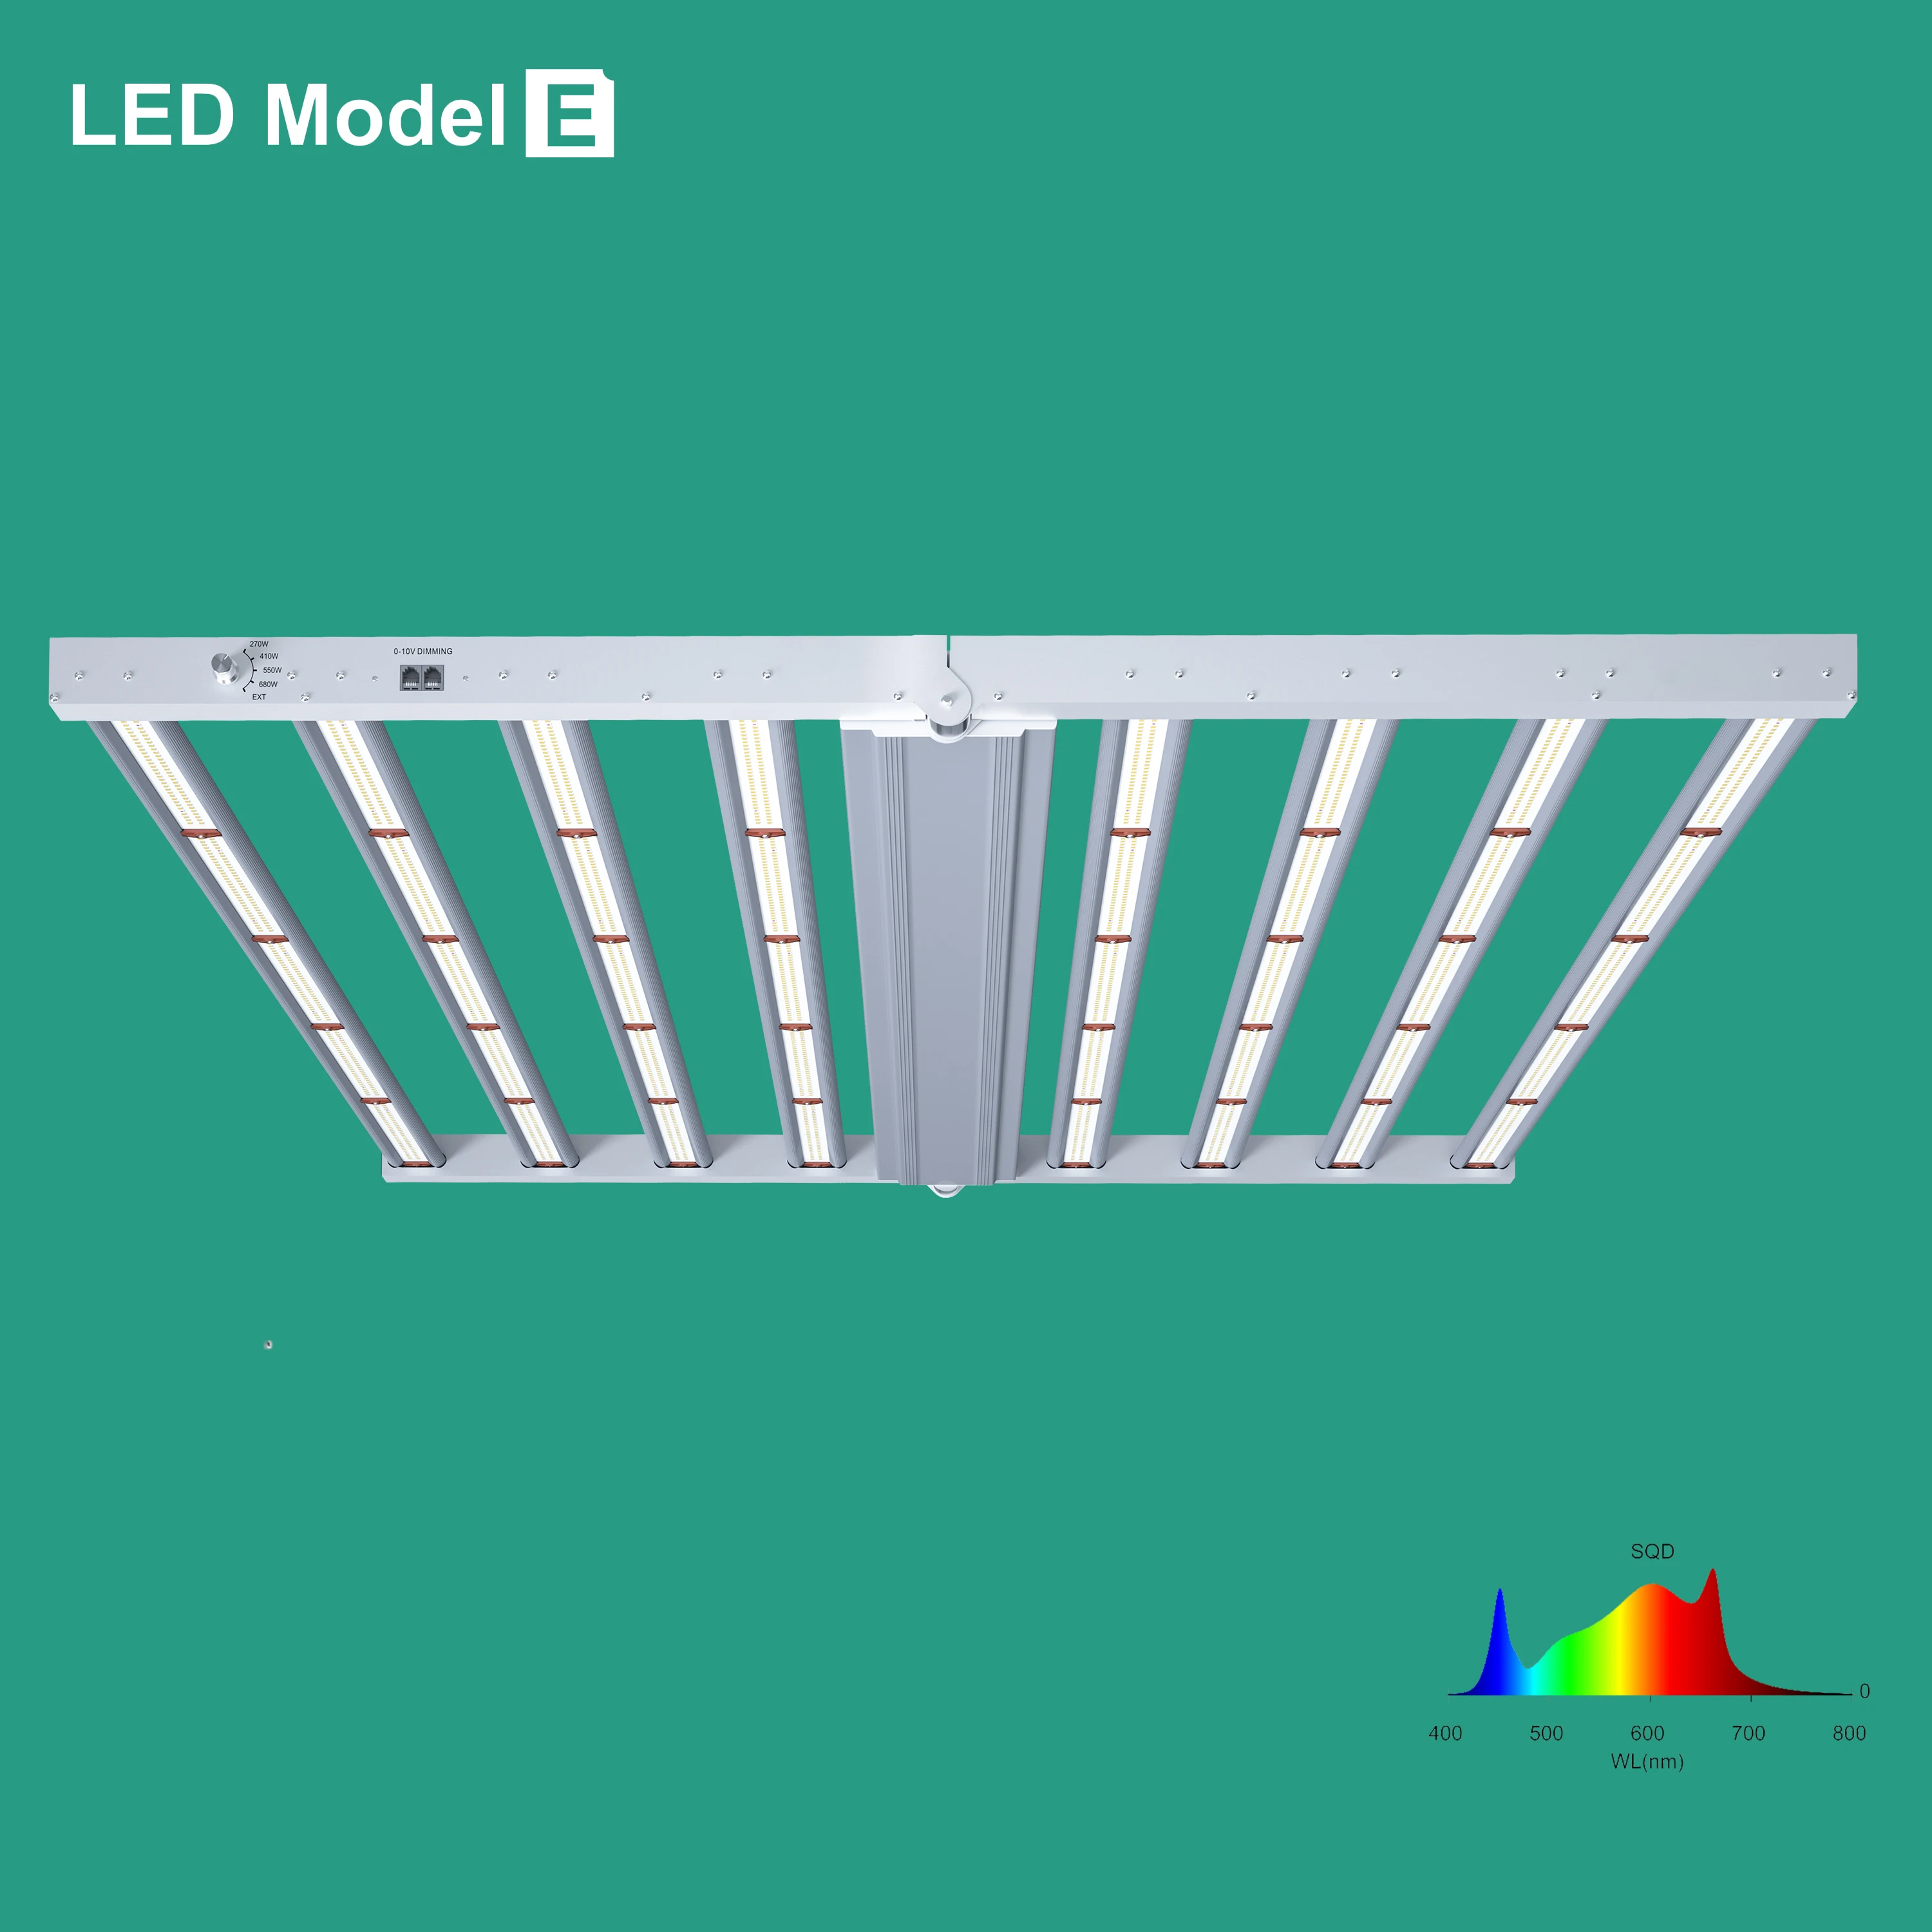 LED grow light 680W Model E 8 bars use  301h diodes offer high efficacy and high harvest to grow your plants